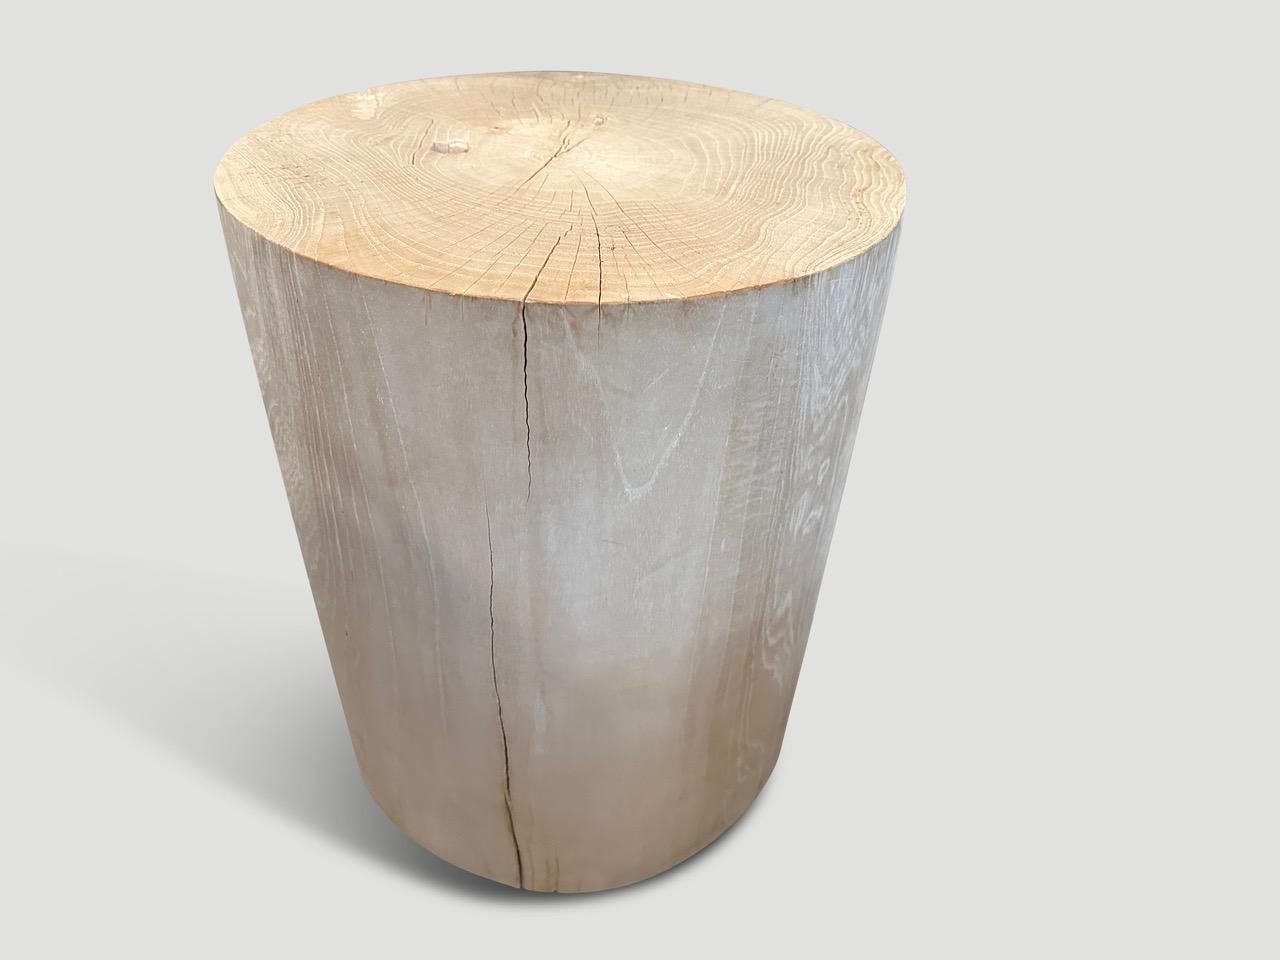 Organic Modern Andrianna Shamaris Cylinder Bleached Teak Wood Side Table or Stool For Sale